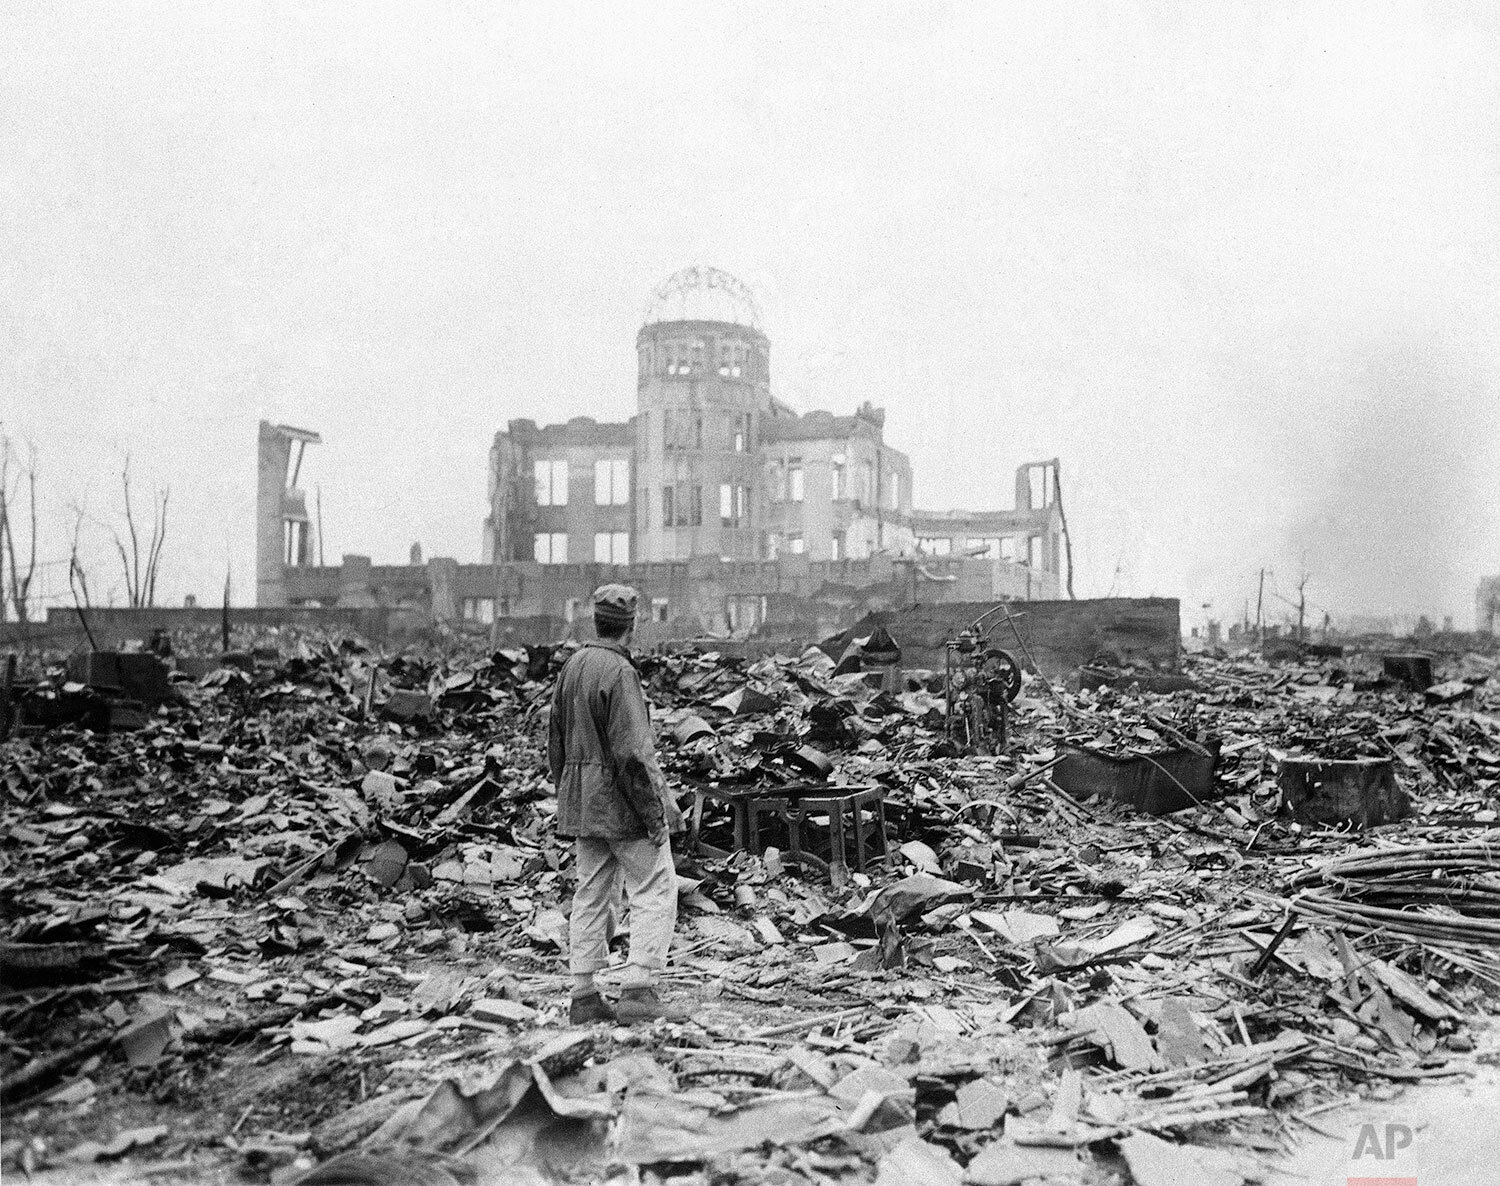  An allied correspondent stands in a sea of rubble before the shell of a building that once was a movie theater in Hiroshima Sept. 8, 1945, a month after the first atomic bomb ever used in warfare was dropped by the U.S. to hasten Japan's surrender. 